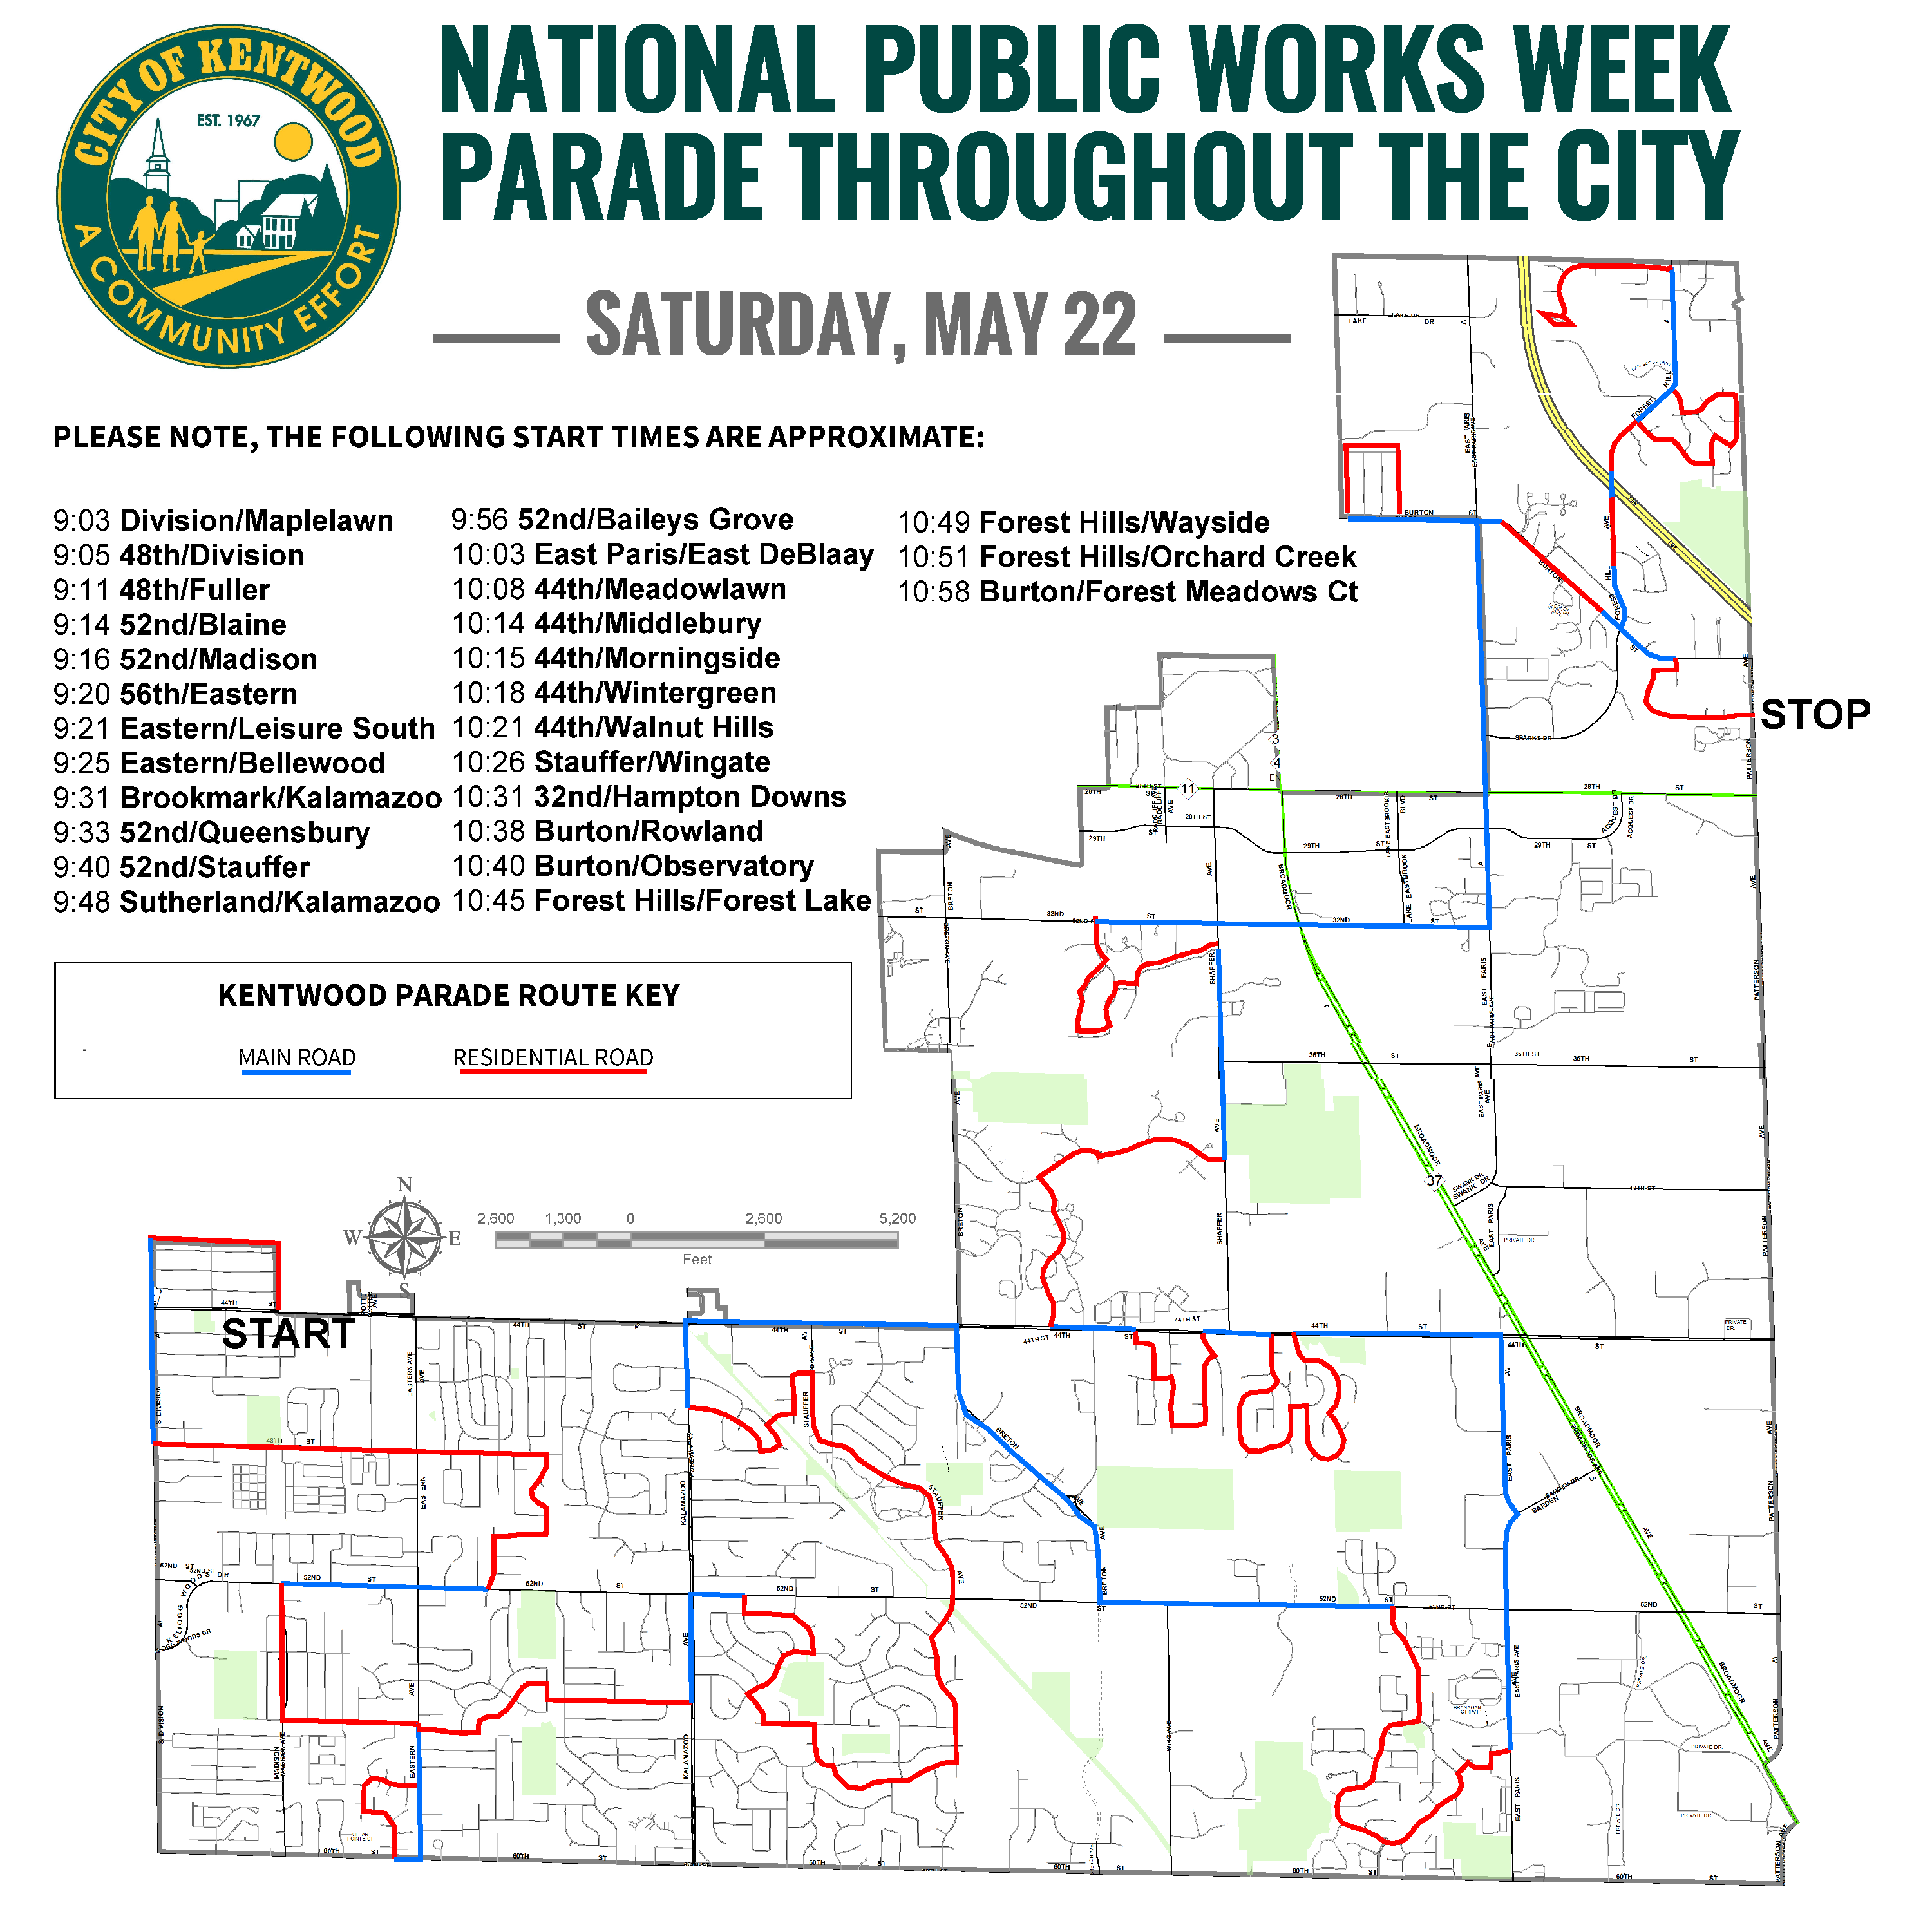 National Public Works Week 2021 Parade Route for Saturday, May 22